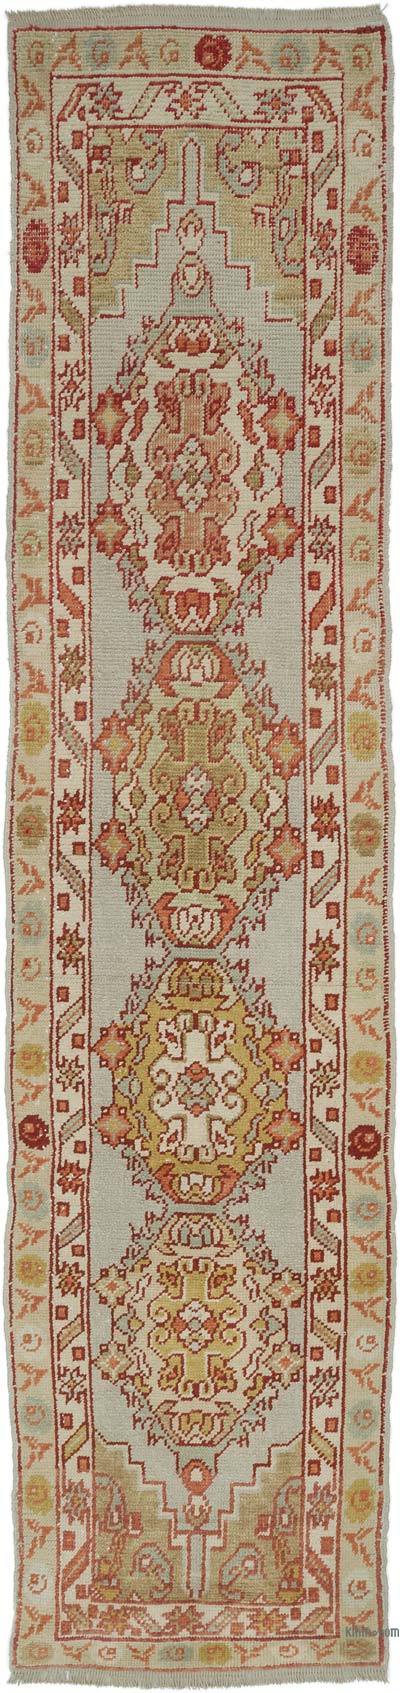 New Turkish Hand-Knotted Runner - 2' 8" x 11' 4" (32 in. x 136 in.)